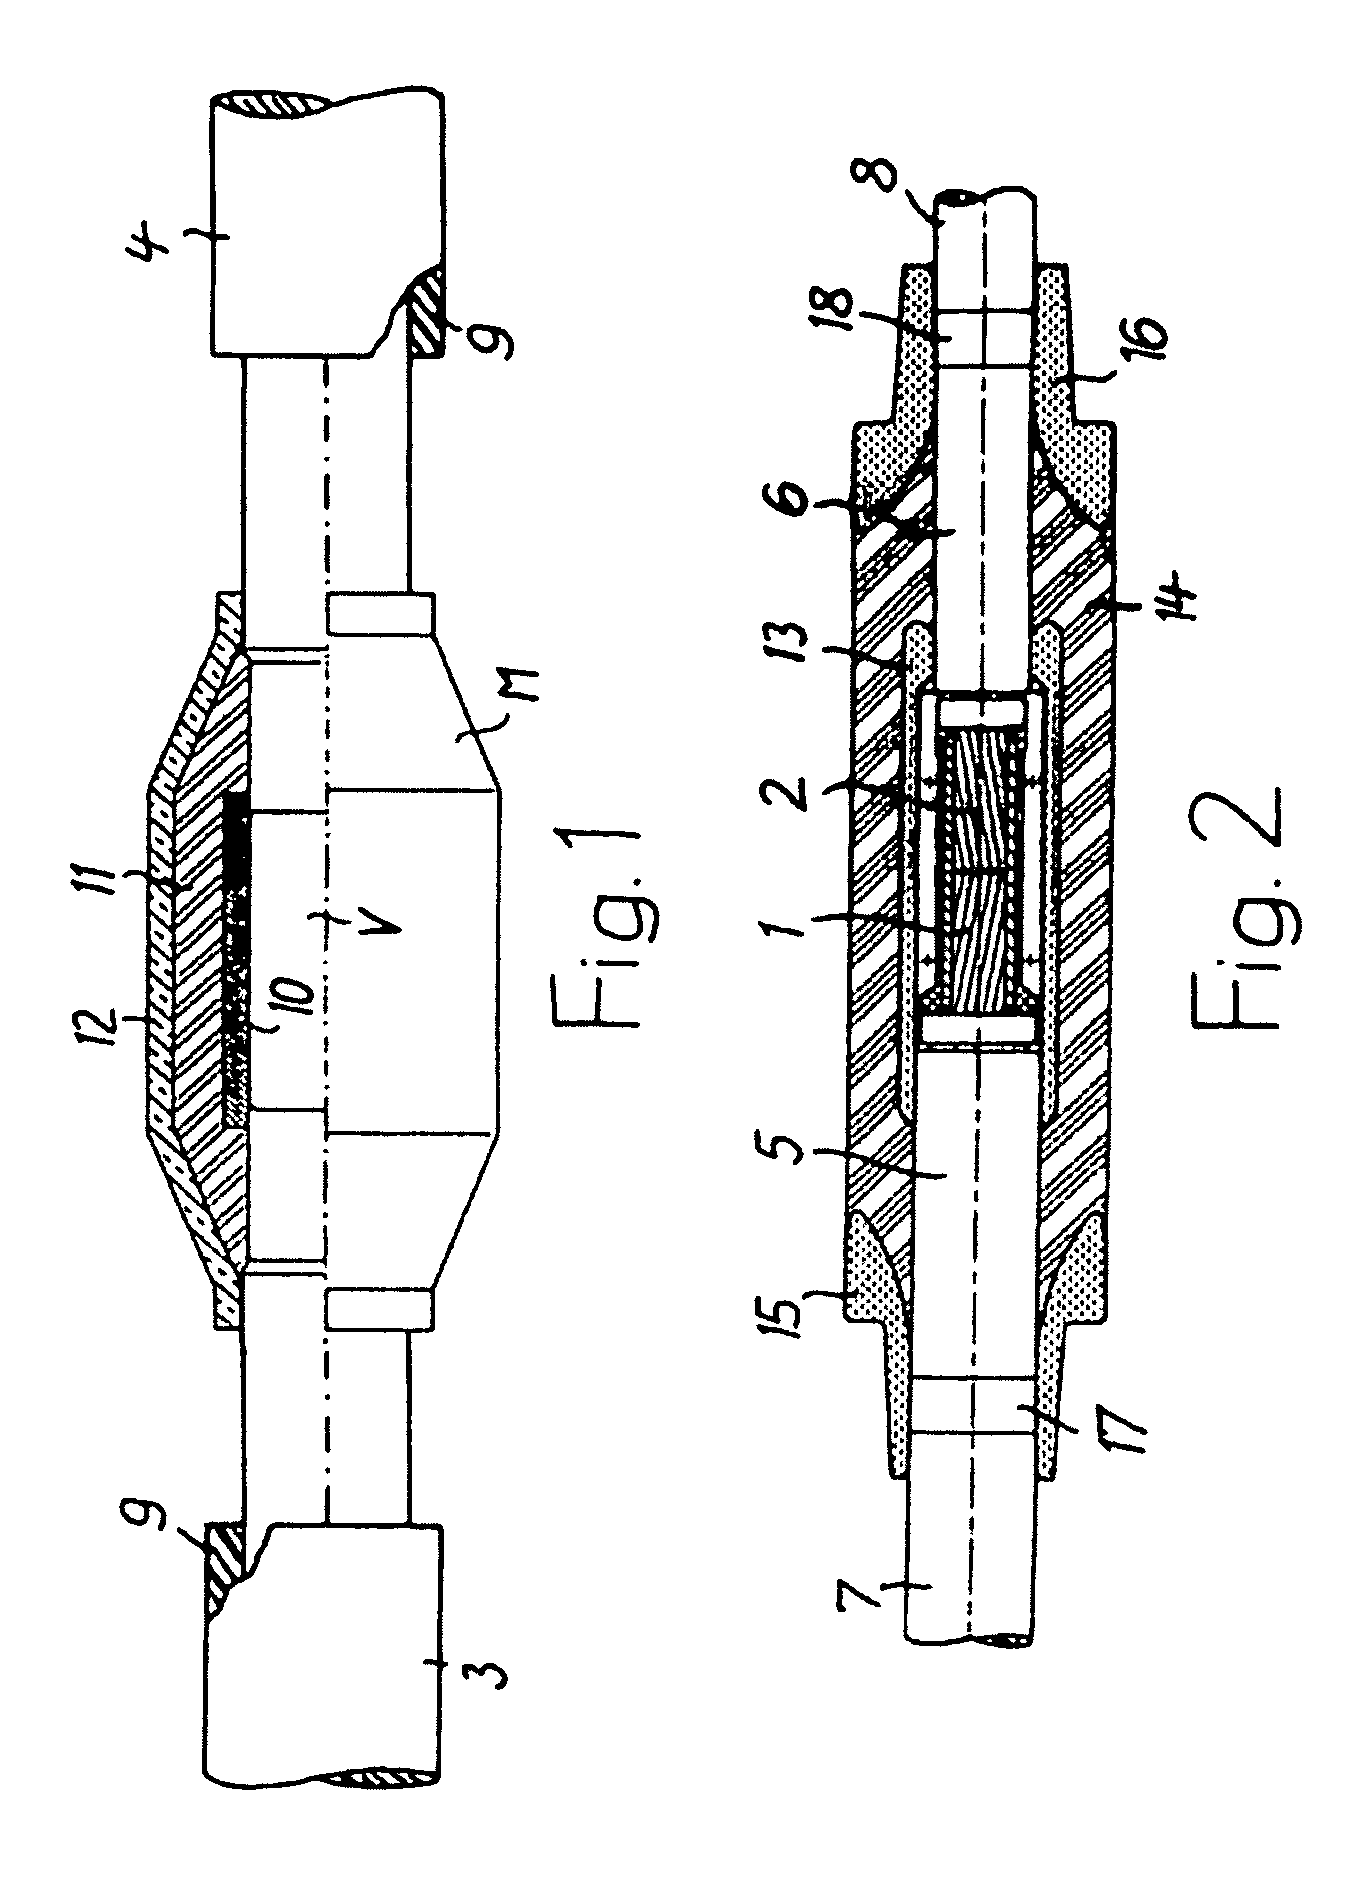 Apparatus for a junction point between two electrical high-voltage cables